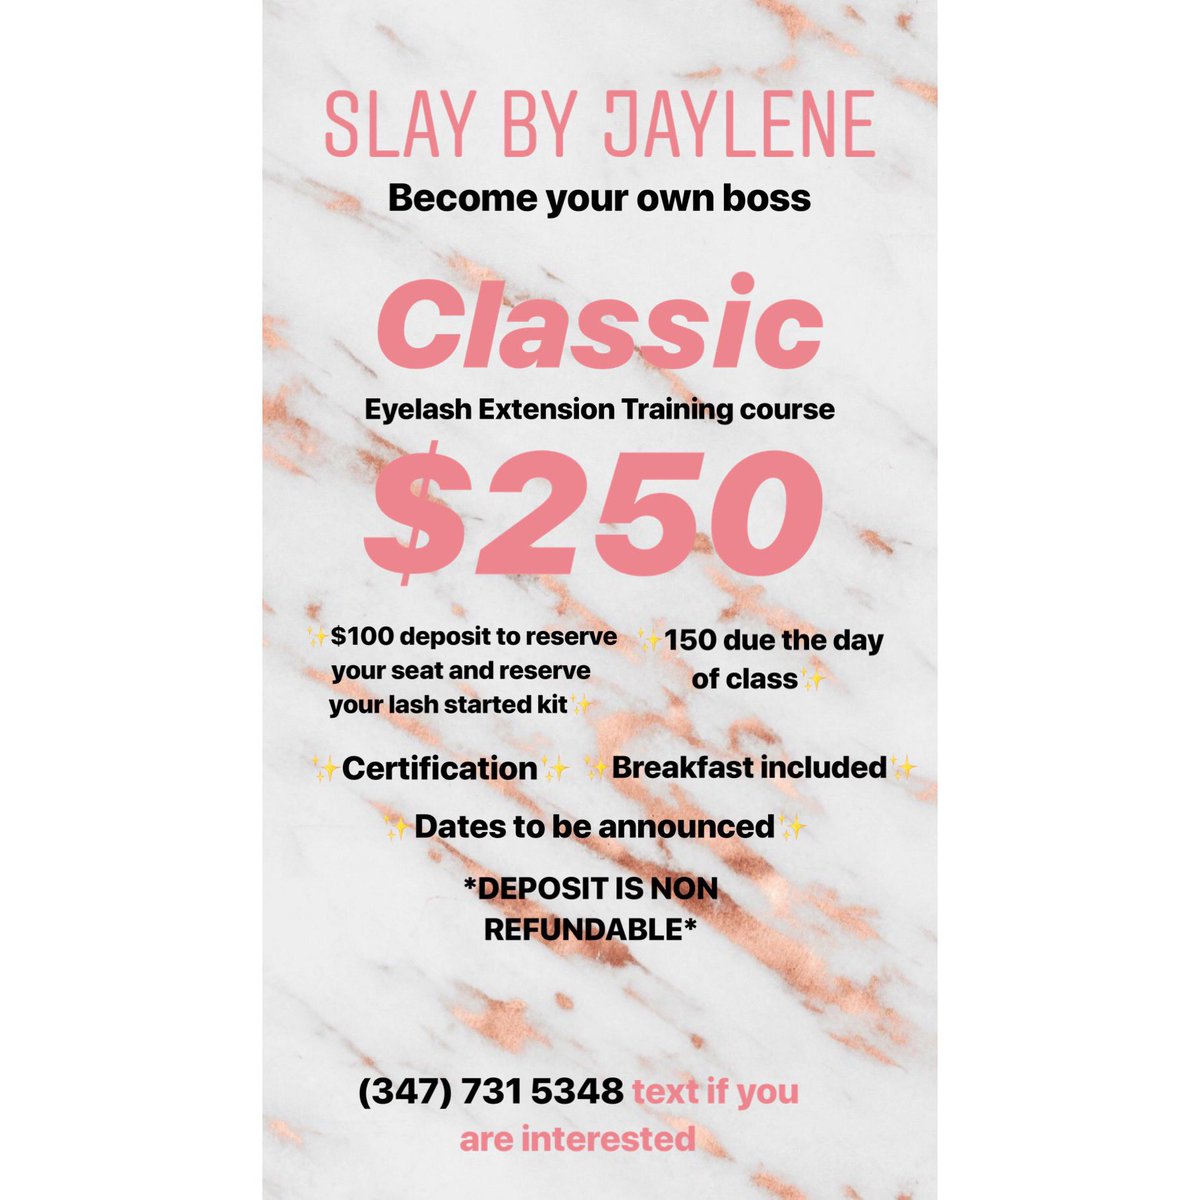 WANT TO BECOME A CERTIFIED LASH TECH! TEXT (347)731-5348 IF YOU ARE INTERESTED!!! 💛💛💛 @ slaybyjaylene @ jayylenee Instagram
#nyc #brooklyn #queens #harlem #bronx #nyclashtech #brooklynlashtech #queenslashtech #harlemlashtech #bronxlashtech #jerseycitylashtech #nyclashclass